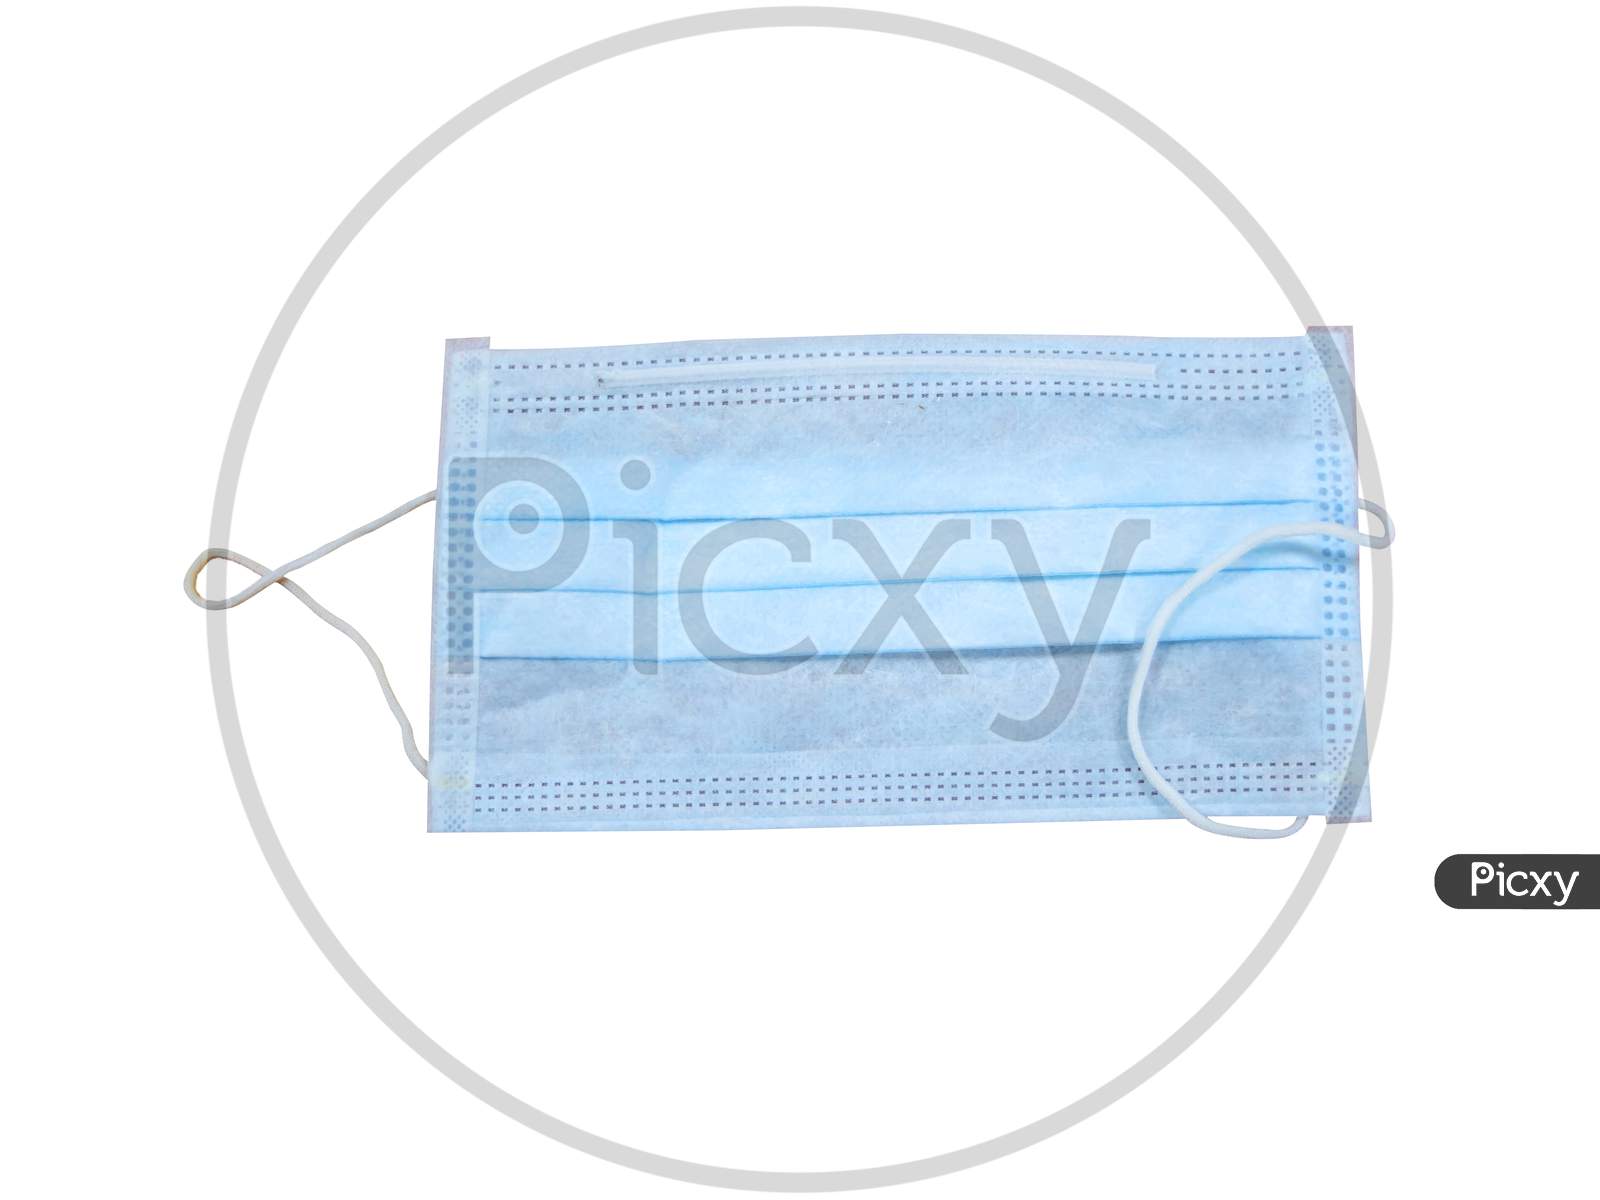 Disposable Surgical Mask, a Personal Protective Equipment